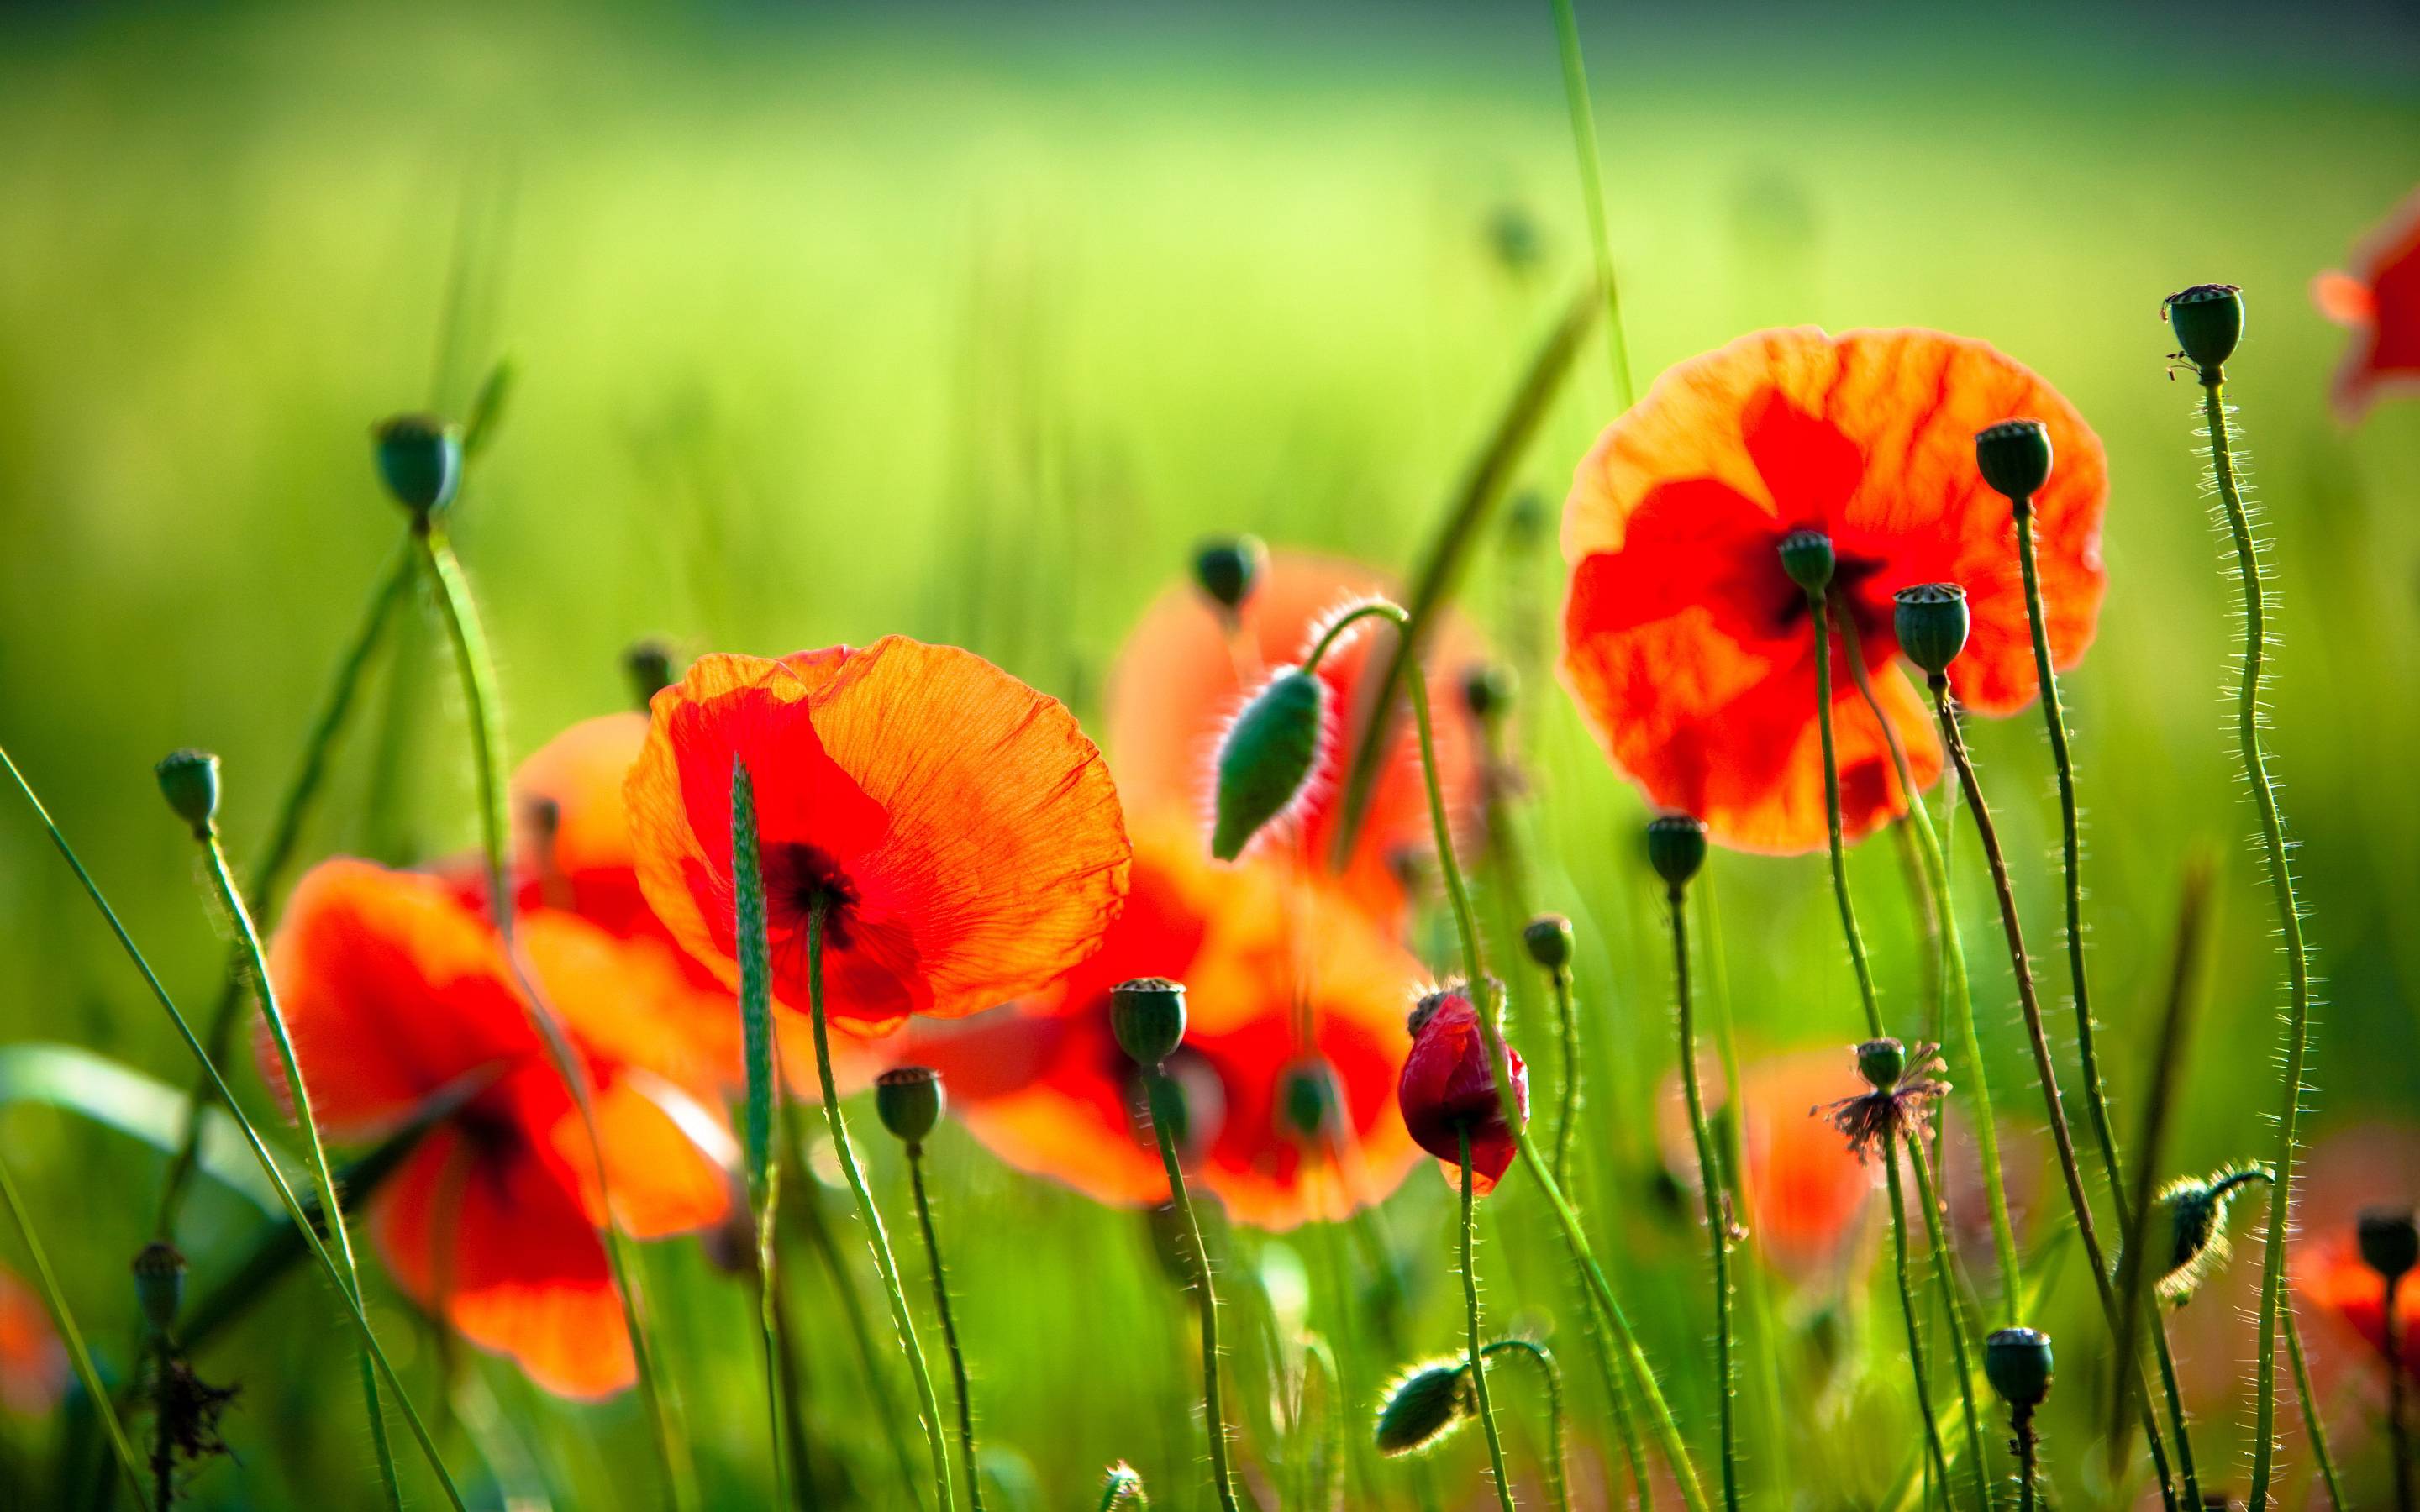 Red Poppy Wallpapers - Wallpaper Cave